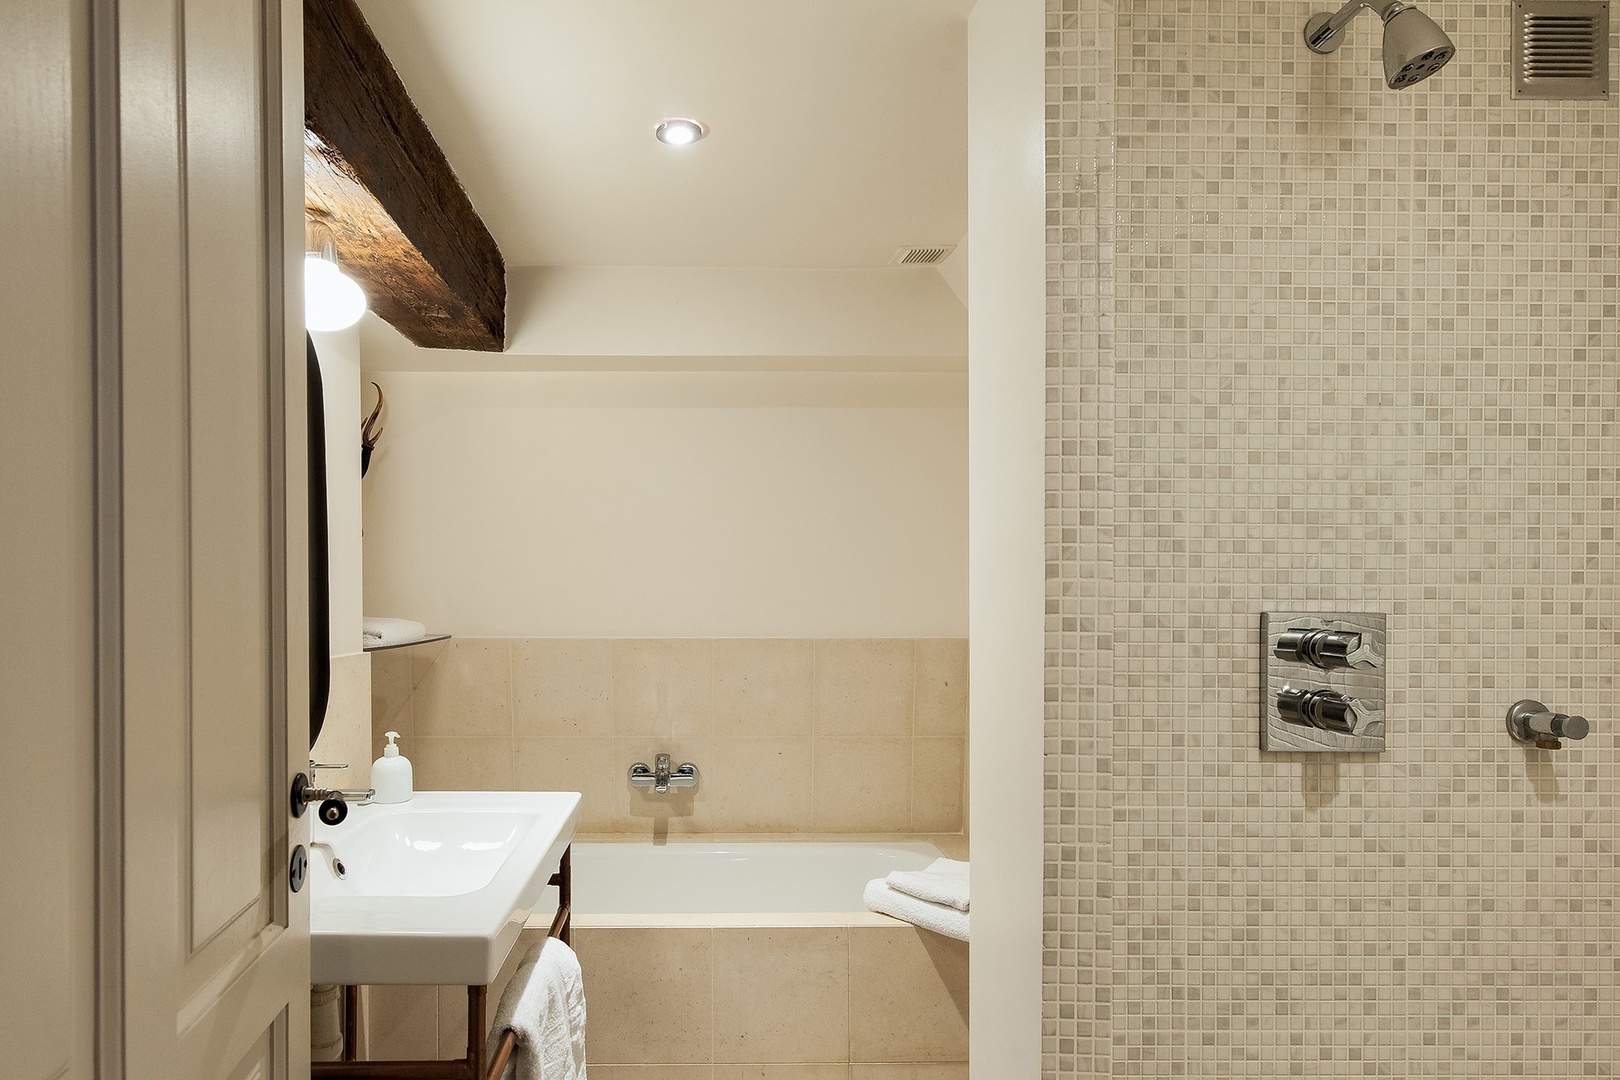 Modern conveniences mix with original features in the bathroom.